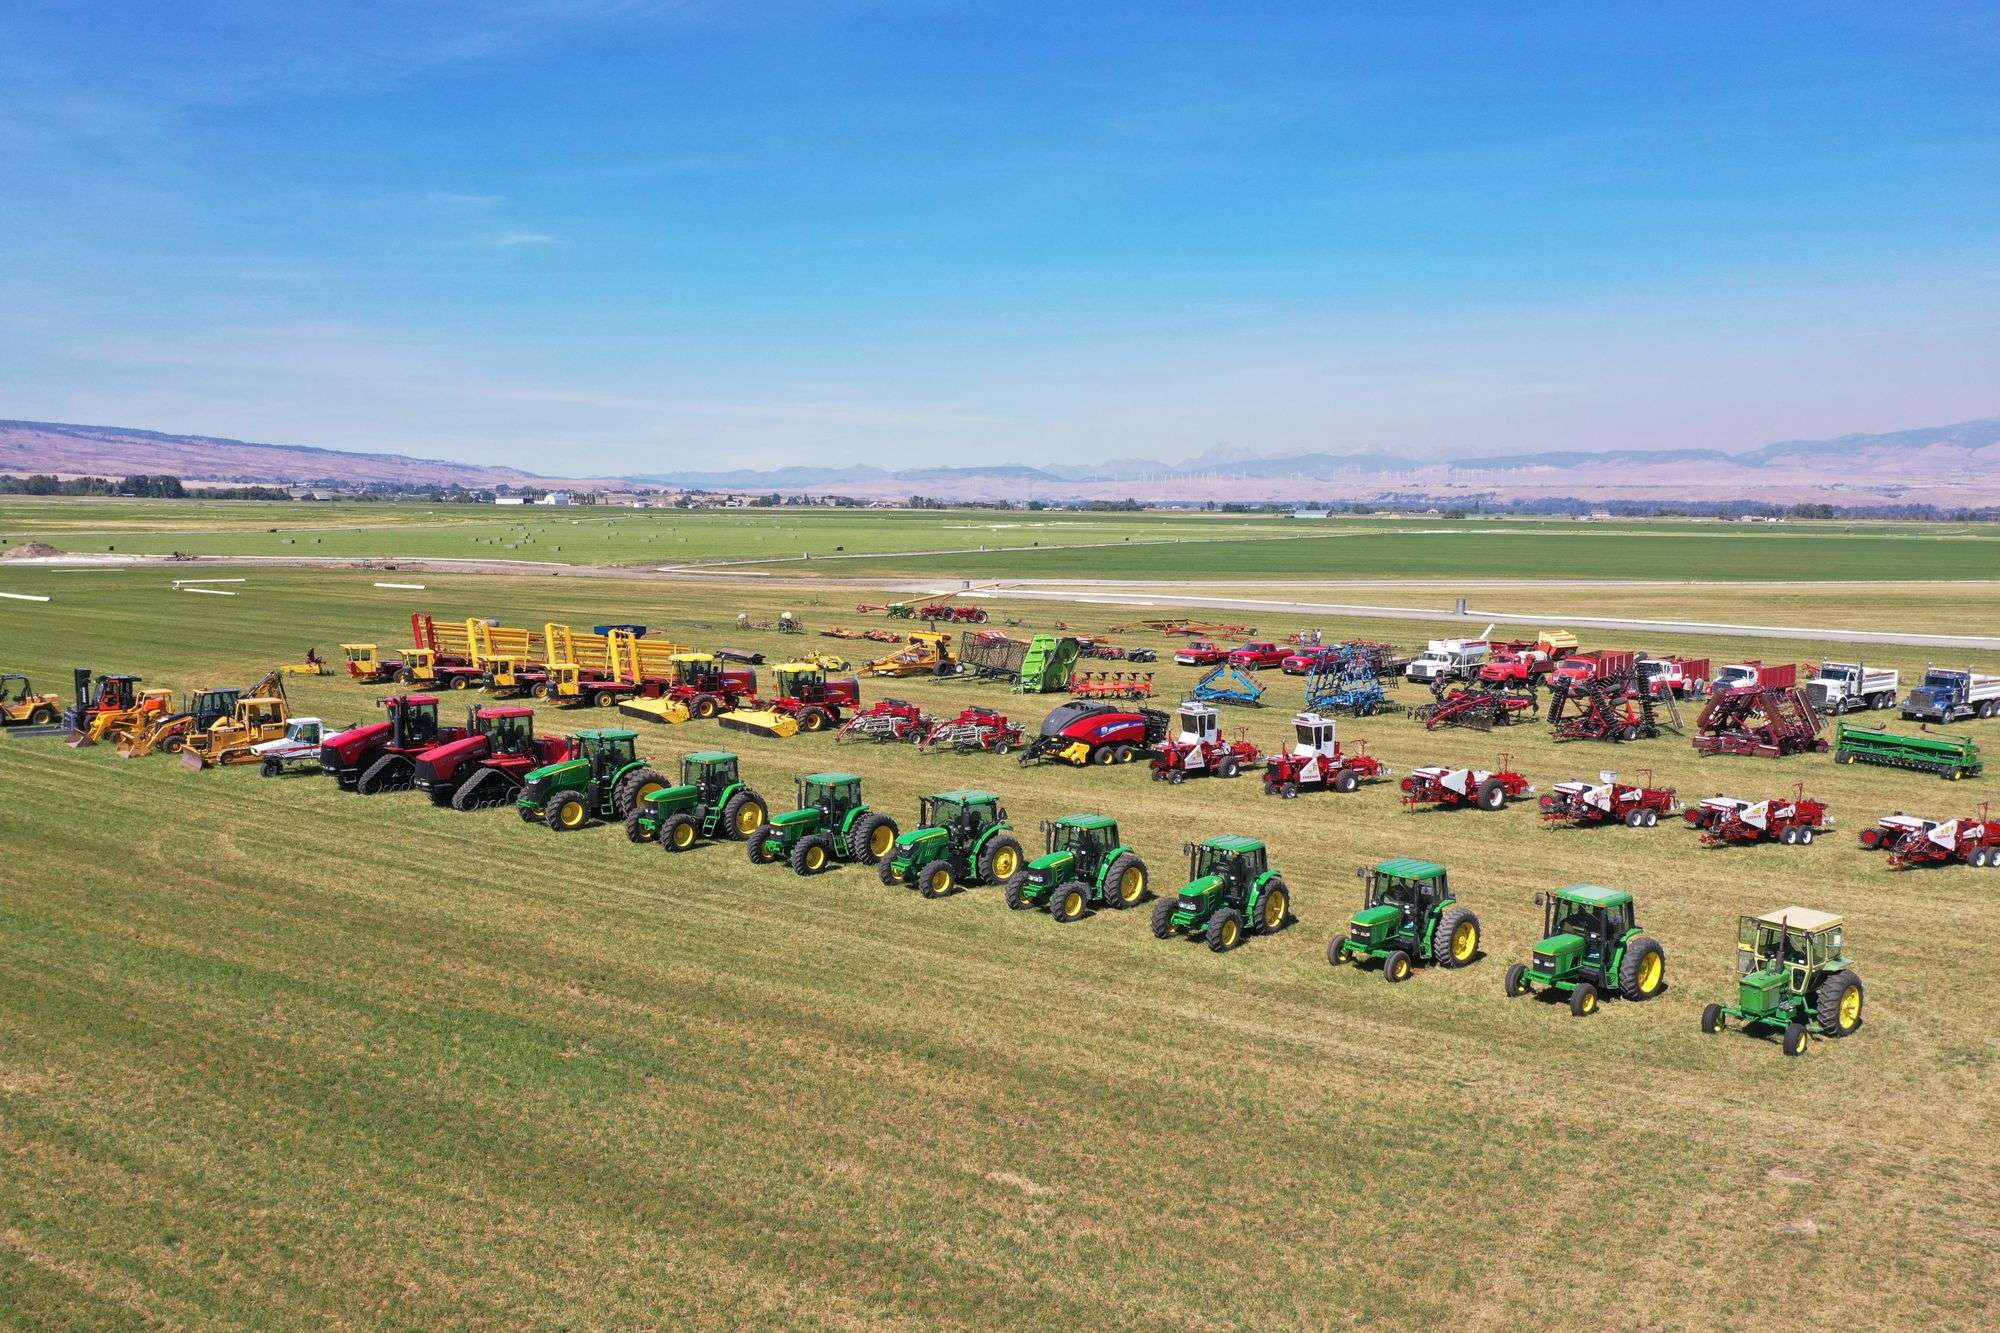 Tractor fleet and other equipment